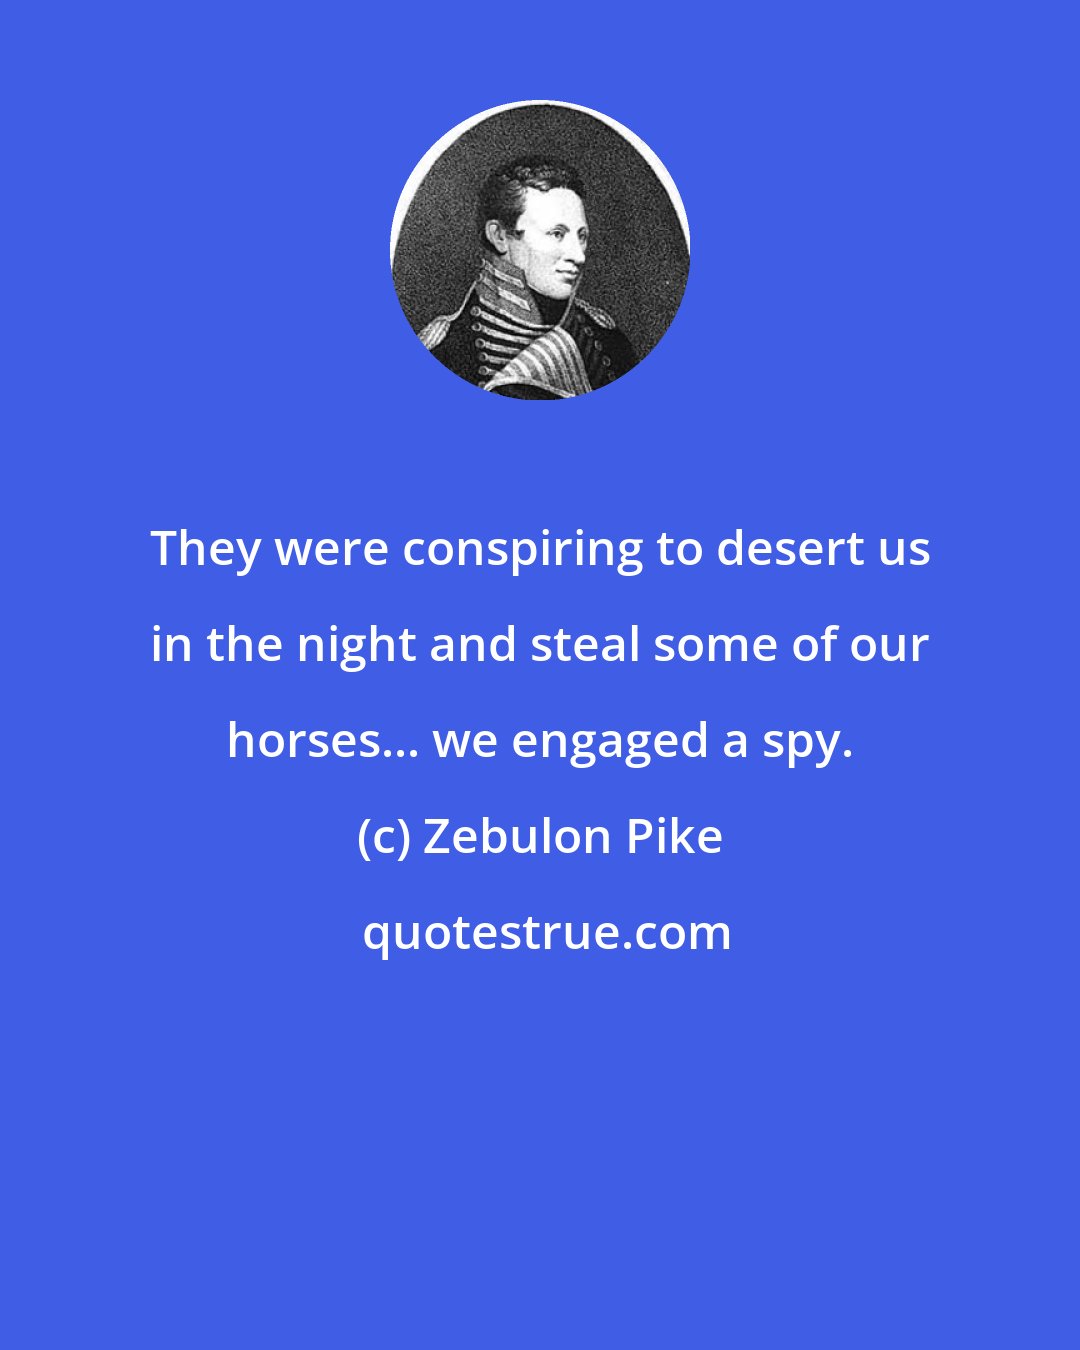 Zebulon Pike: They were conspiring to desert us in the night and steal some of our horses... we engaged a spy.